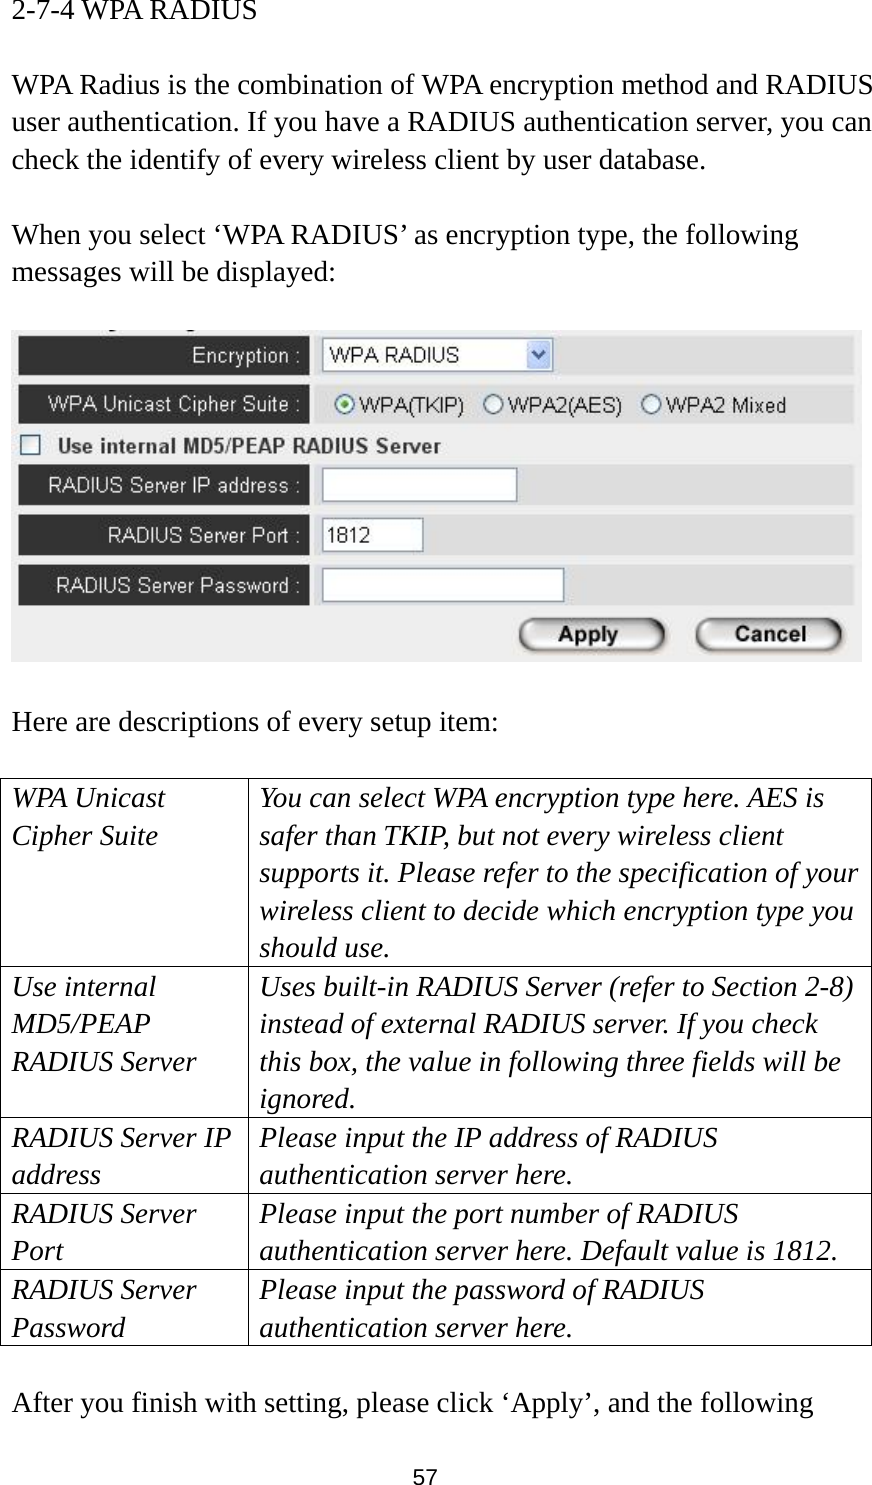 57 2-7-4 WPA RADIUS  WPA Radius is the combination of WPA encryption method and RADIUS user authentication. If you have a RADIUS authentication server, you can check the identify of every wireless client by user database.  When you select ‘WPA RADIUS’ as encryption type, the following messages will be displayed:    Here are descriptions of every setup item:  WPA Unicast Cipher Suite You can select WPA encryption type here. AES is safer than TKIP, but not every wireless client supports it. Please refer to the specification of your wireless client to decide which encryption type you should use. Use internal MD5/PEAP RADIUS Server Uses built-in RADIUS Server (refer to Section 2-8) instead of external RADIUS server. If you check this box, the value in following three fields will be ignored. RADIUS Server IP address Please input the IP address of RADIUS authentication server here. RADIUS Server Port Please input the port number of RADIUS authentication server here. Default value is 1812. RADIUS Server Password Please input the password of RADIUS authentication server here.  After you finish with setting, please click ‘Apply’, and the following 